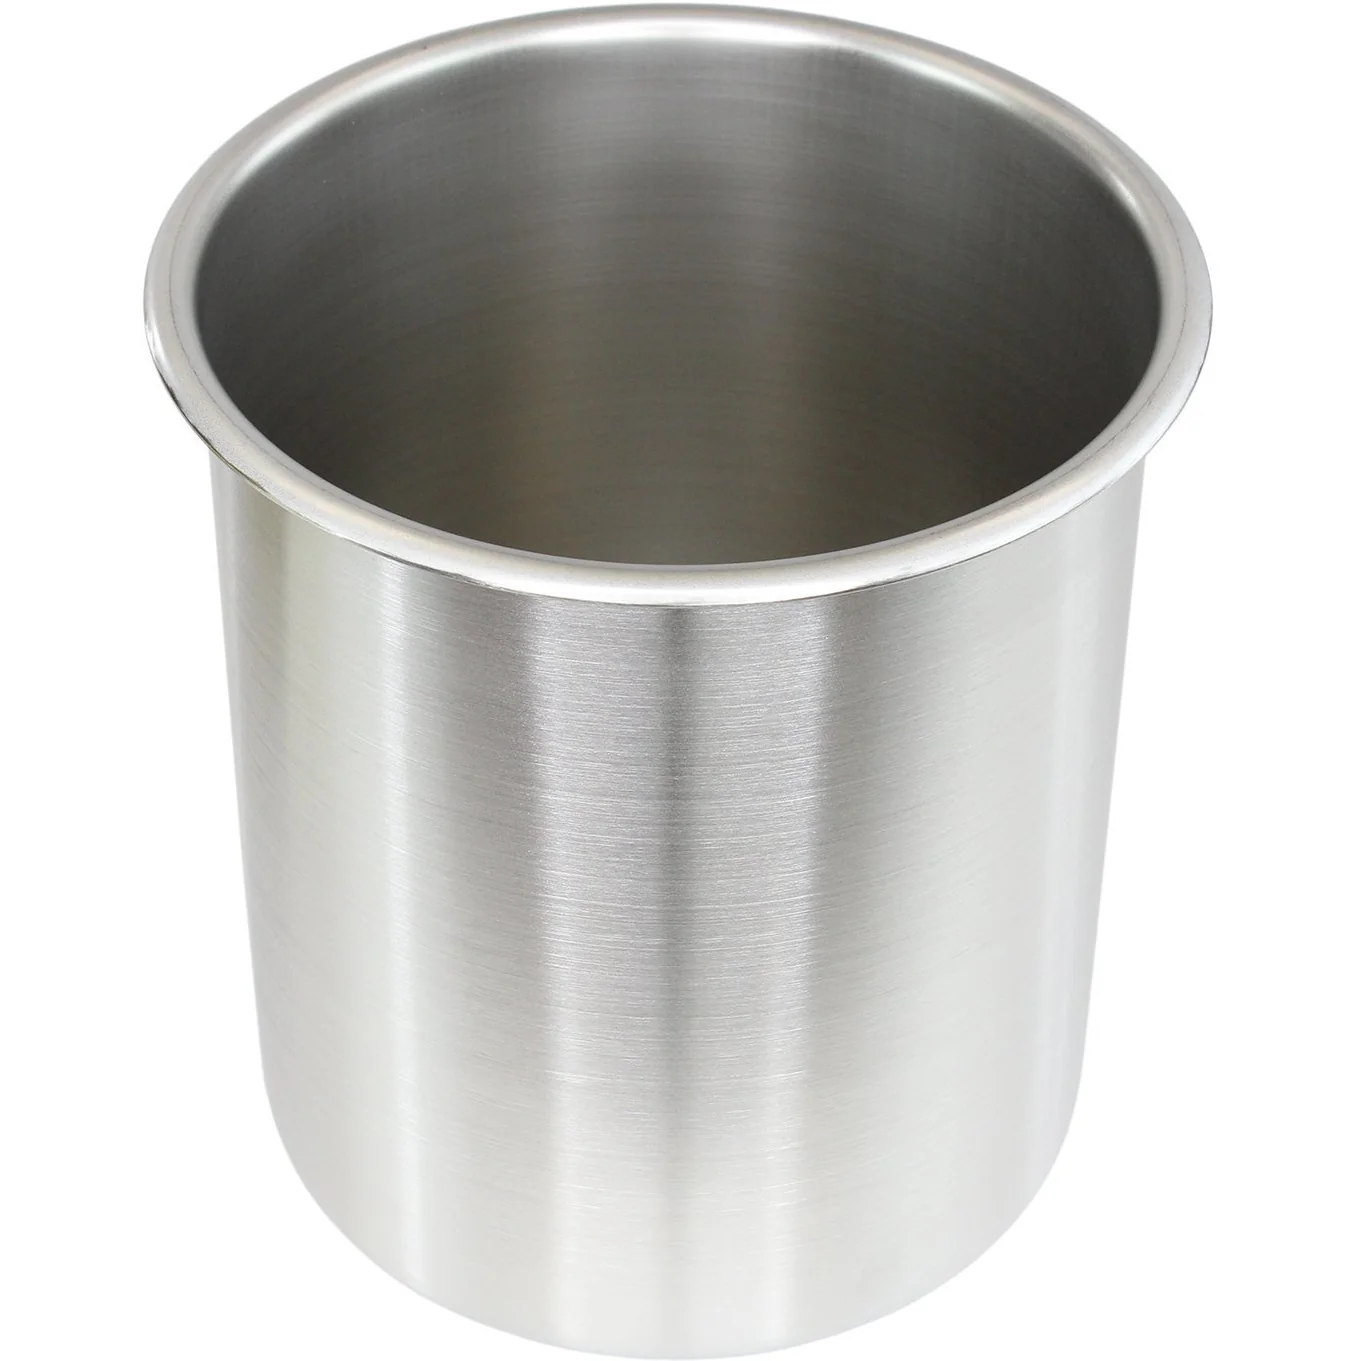 1.5 Gallon Tall Stainless Steel - POT ONLY Questions & Answers